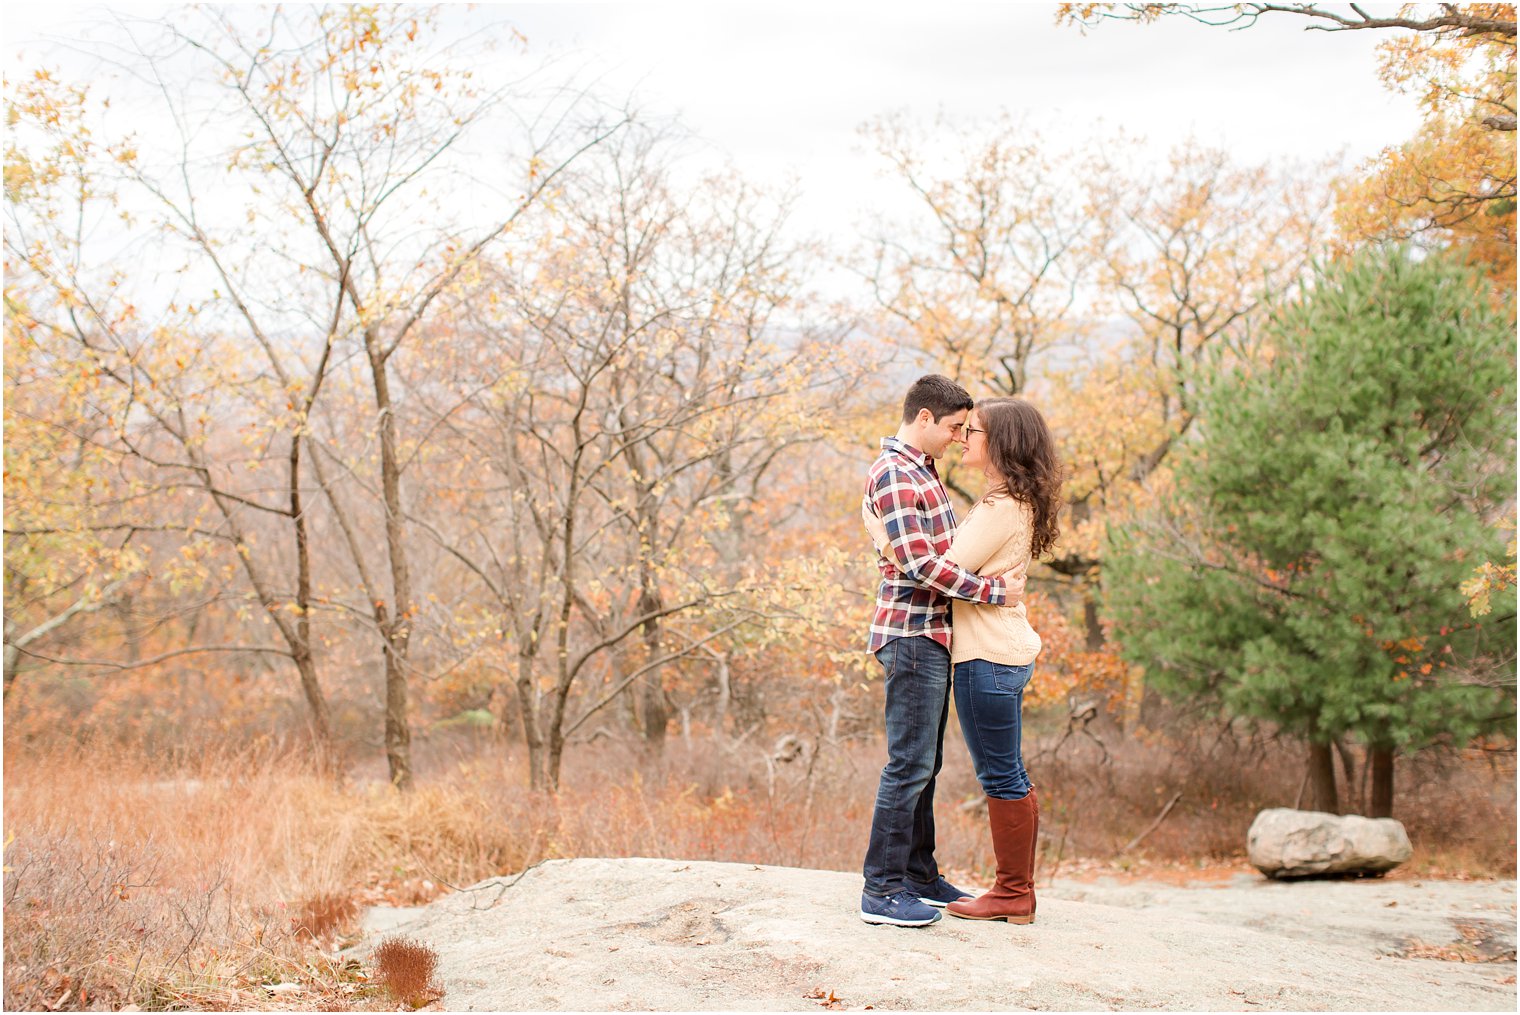 Romantic Engagement Session at Bear Mountain State Park by Idalia Photography